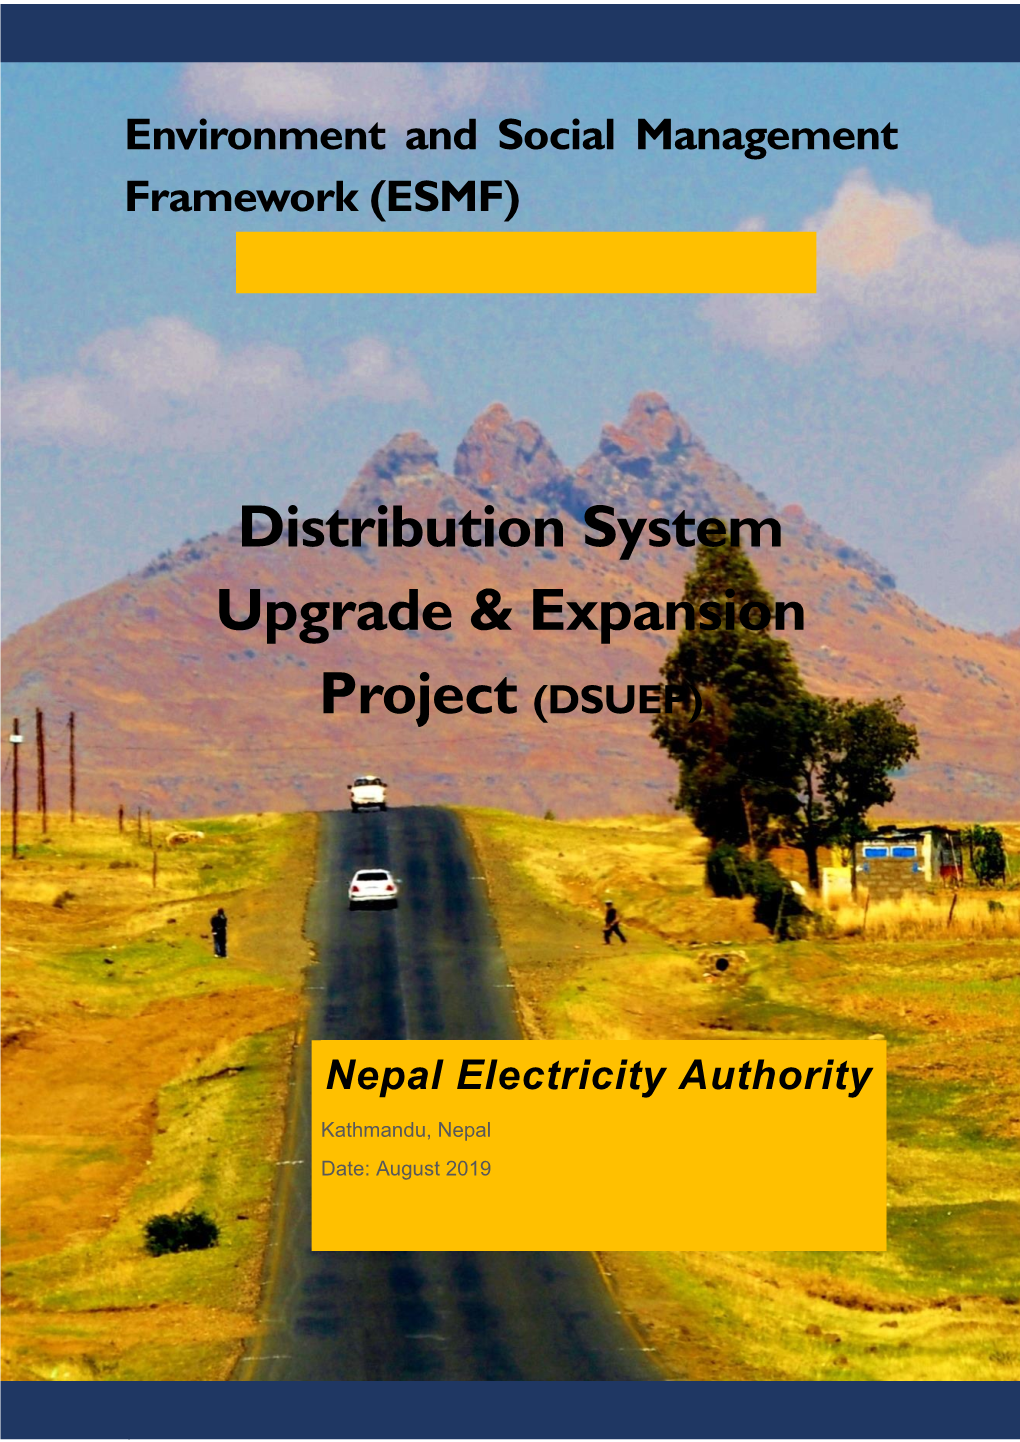 Distribution System Upgrade & Expansion Project (DSUEP)